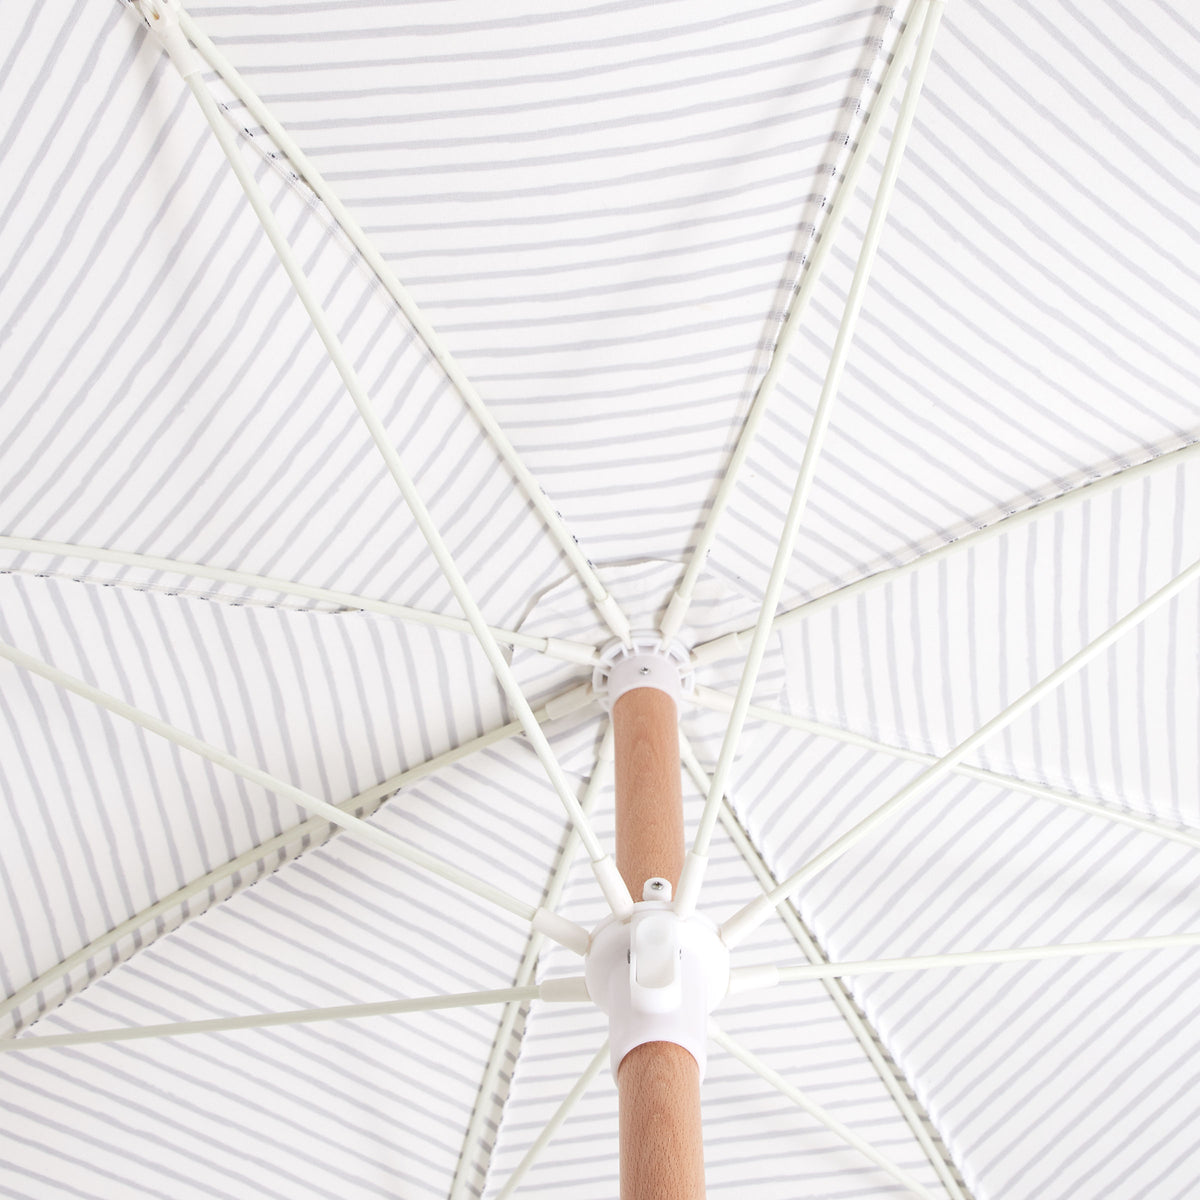 Sunday Supply Co Natural Instinct beach umbrella open and seen from underneath.